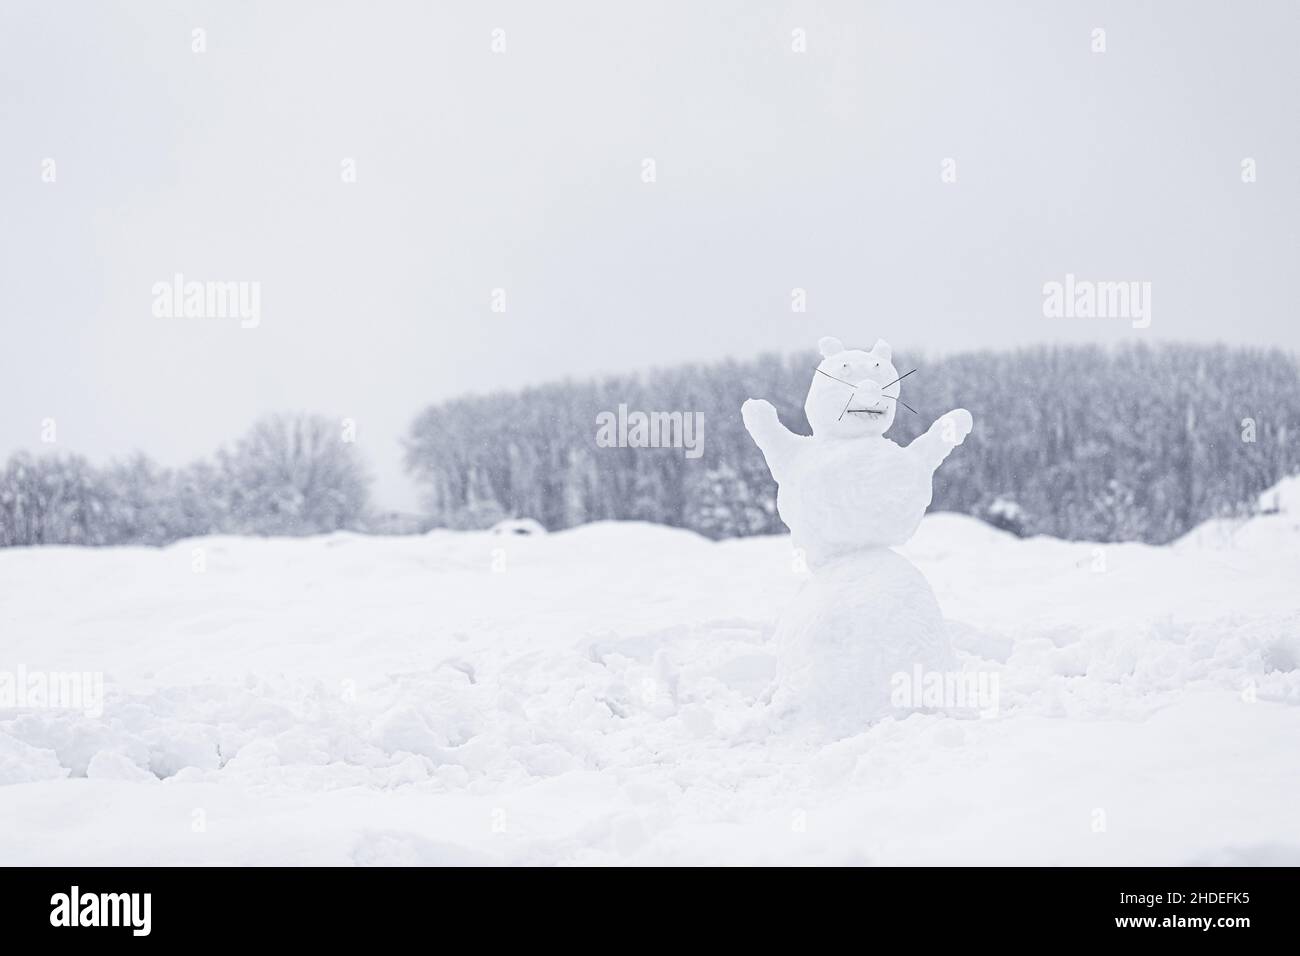 The figure of funny snowman animal in snowy field Stock Photo